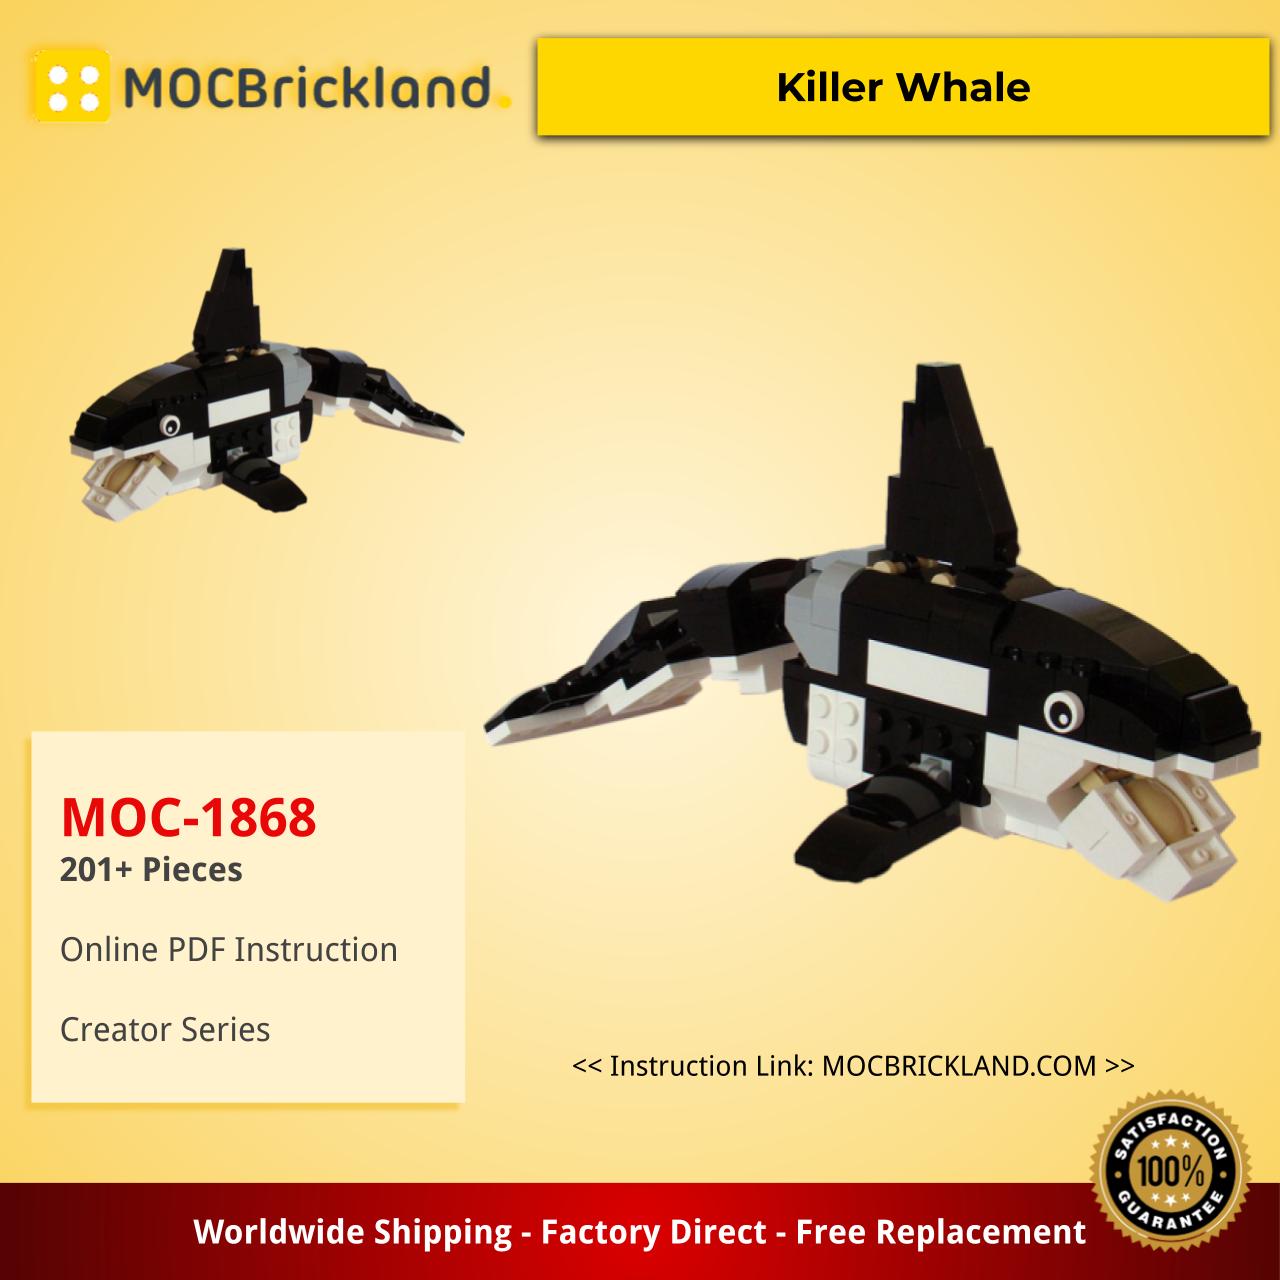 Creator MOC-1868 31021: Killer Whale by Tomik MOCBRICKLAND